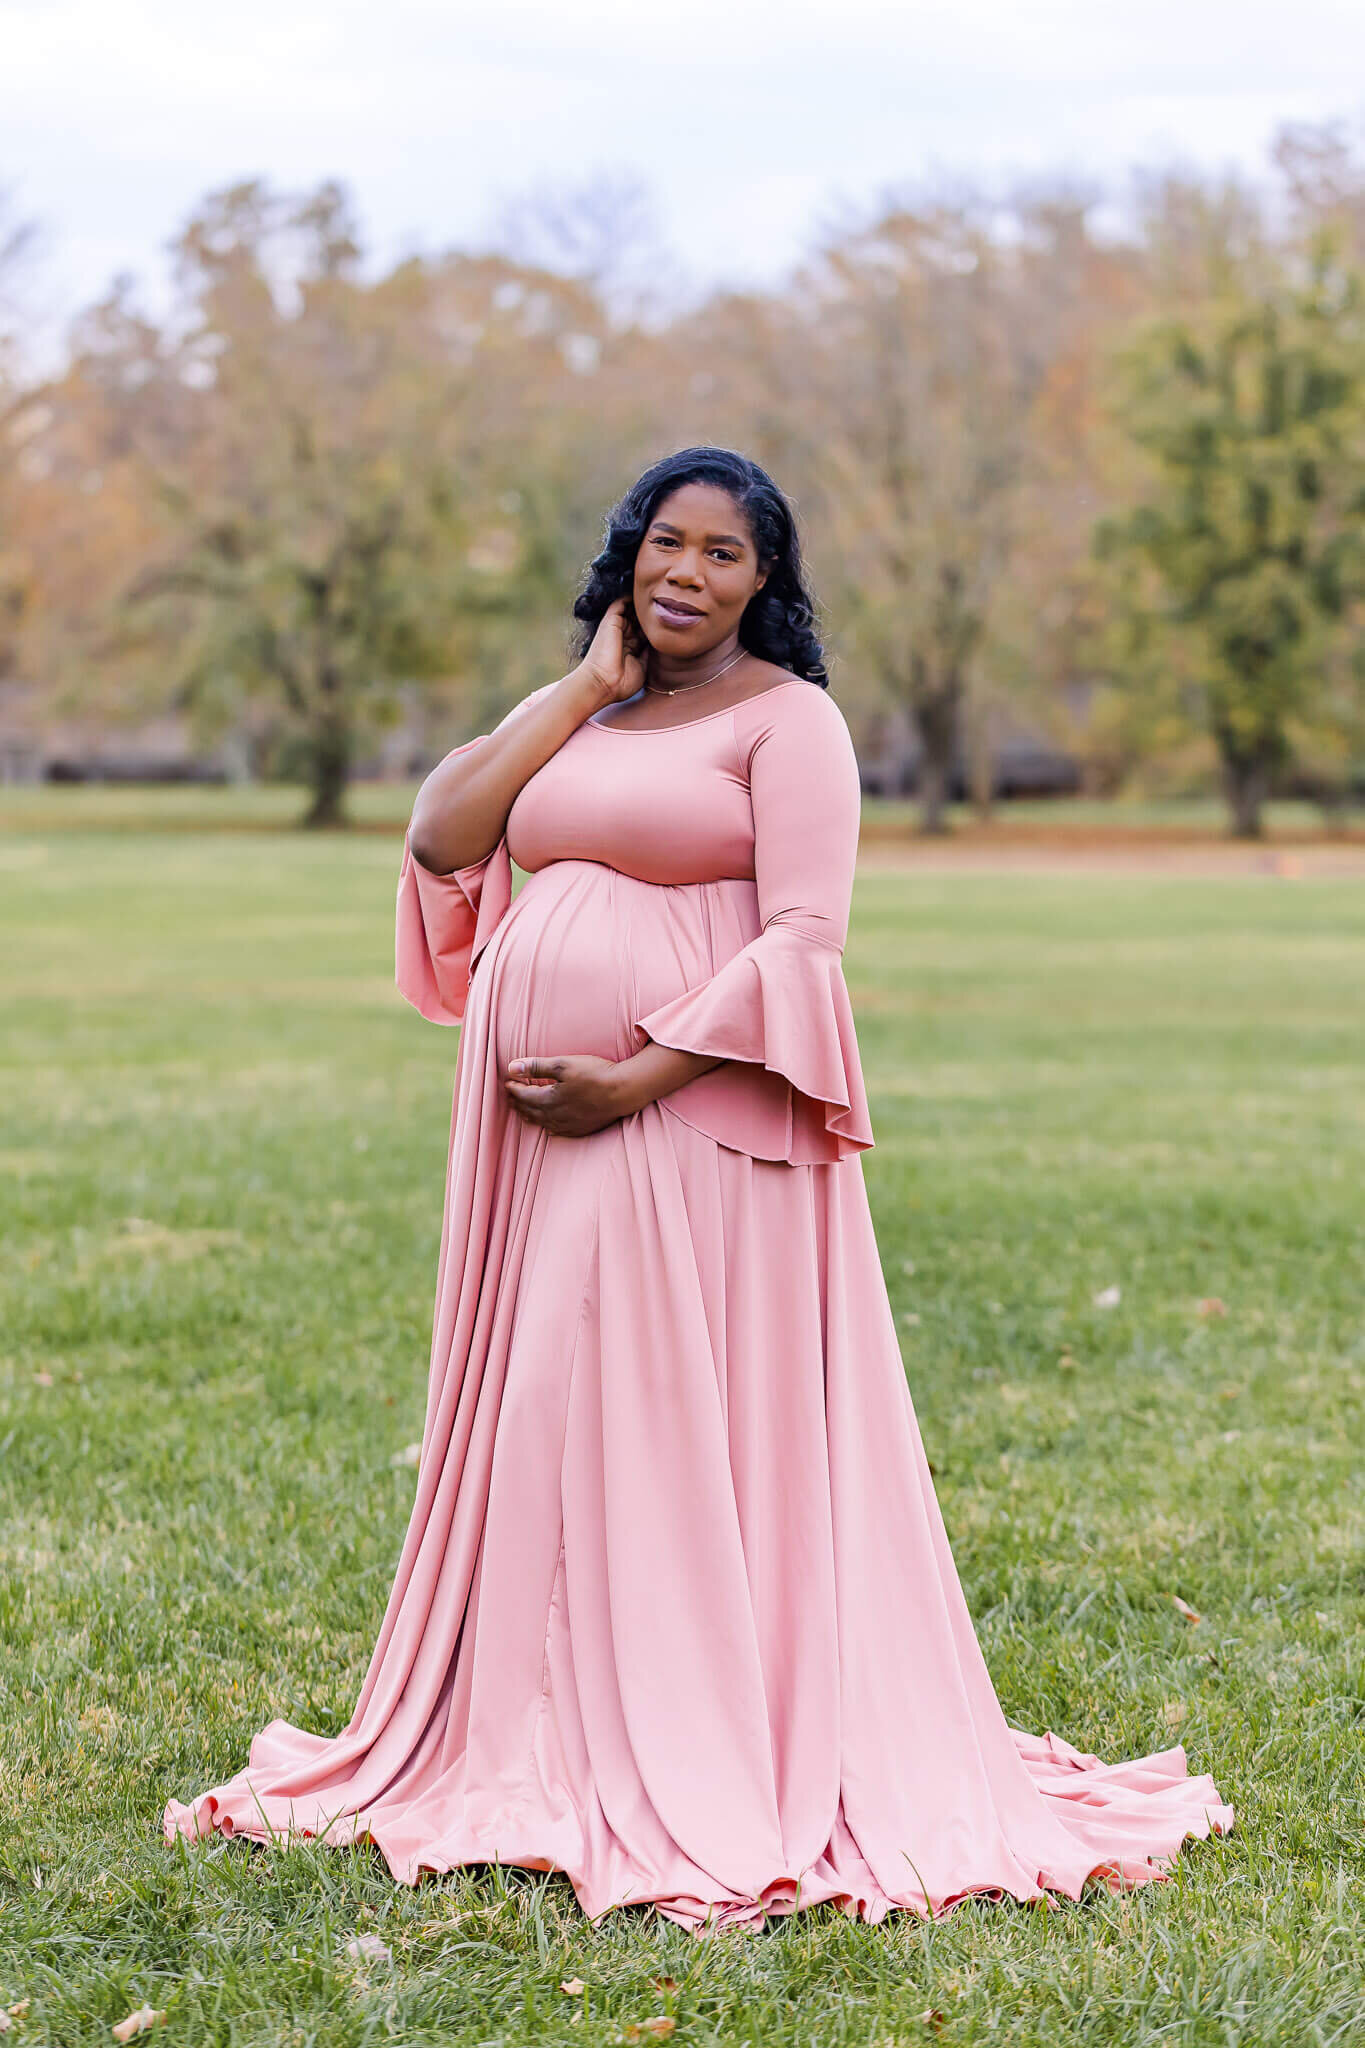 An expecting mother wearing a pink dress posing for her maternity portraits at Fort Hunt.